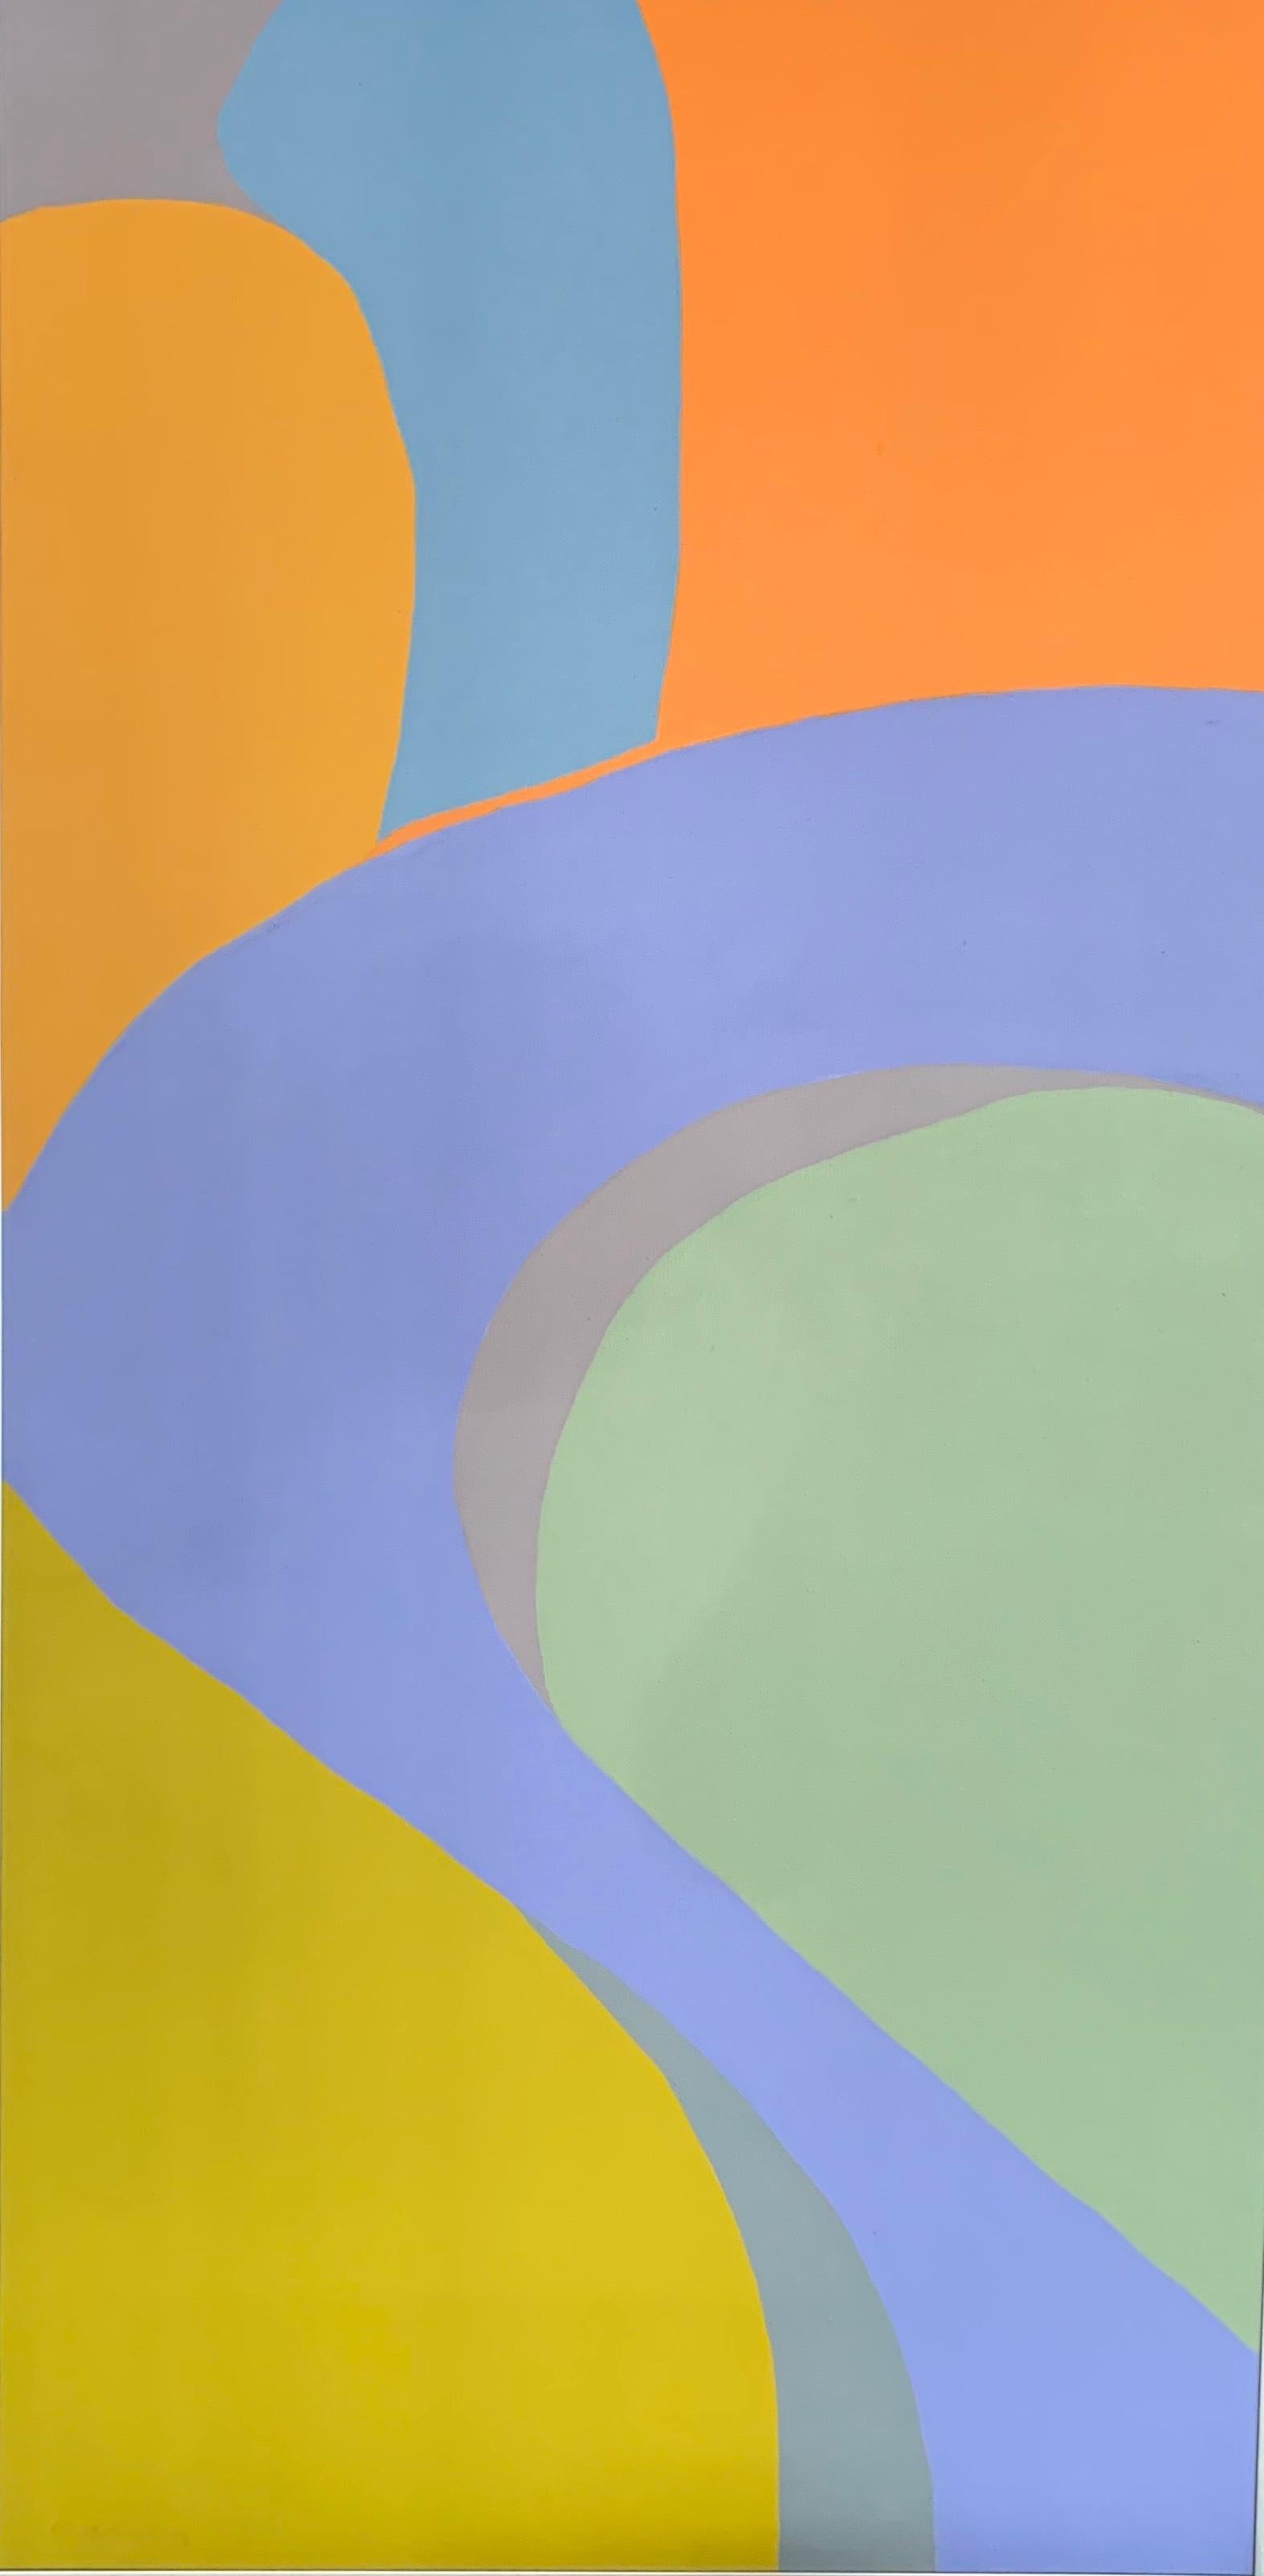 This abstract painting with orange, yellow, blue, green, periwinkle and grey tones still falls under artist Jackie Carson's hard edge style while reflecting organic, curvy shapes. Carson's signature can be found at the bottom left of the painting.